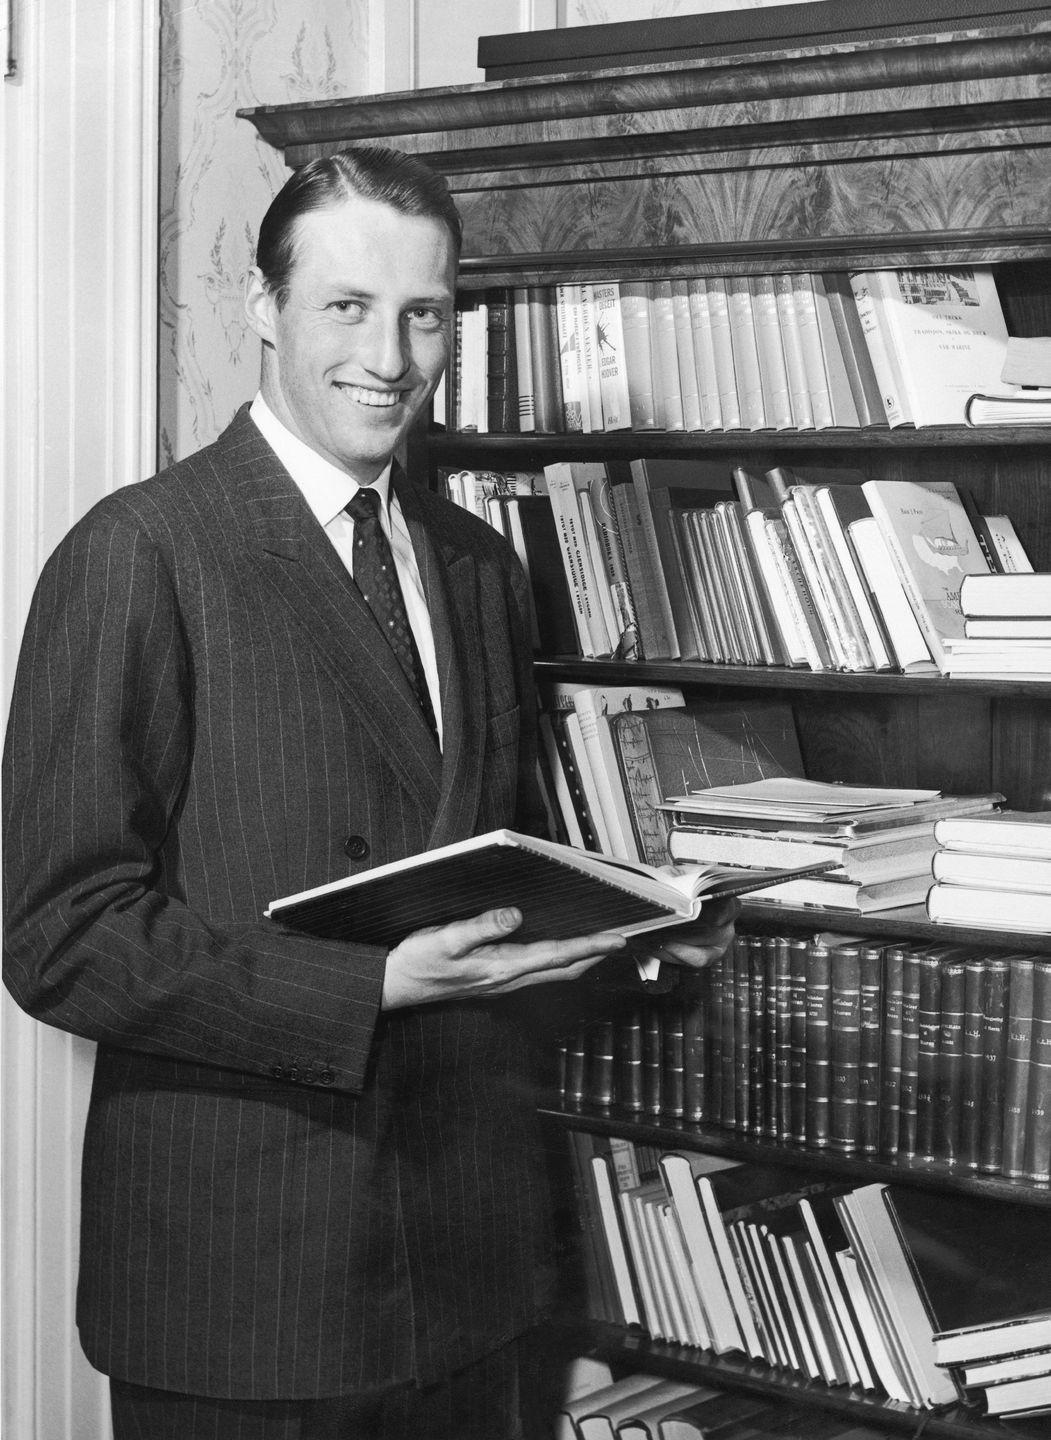 prince harald of norway in 1963